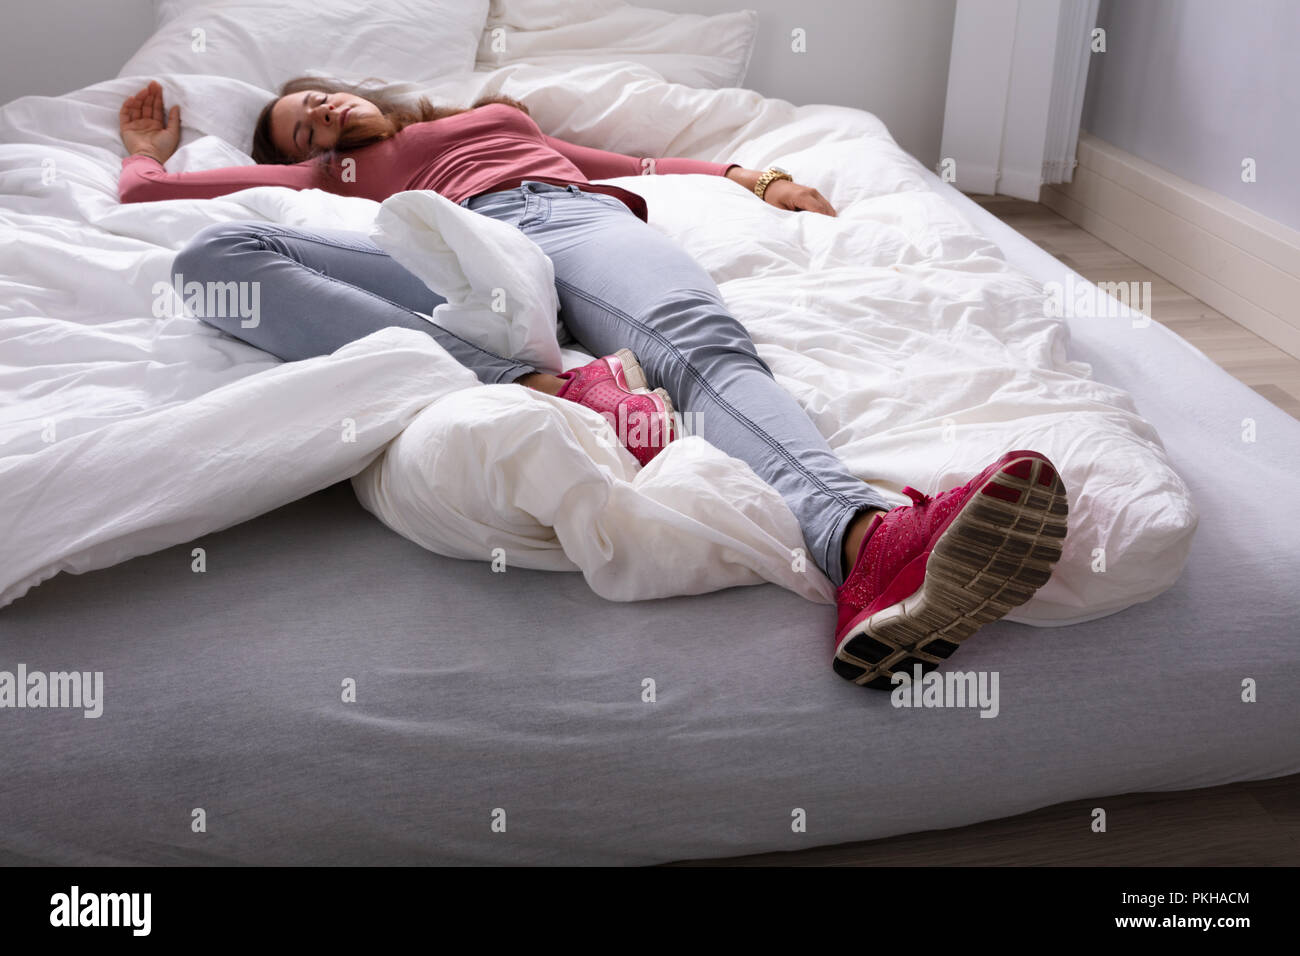 Young Woman Sleeping On Bed In Bedroom Stock Photo